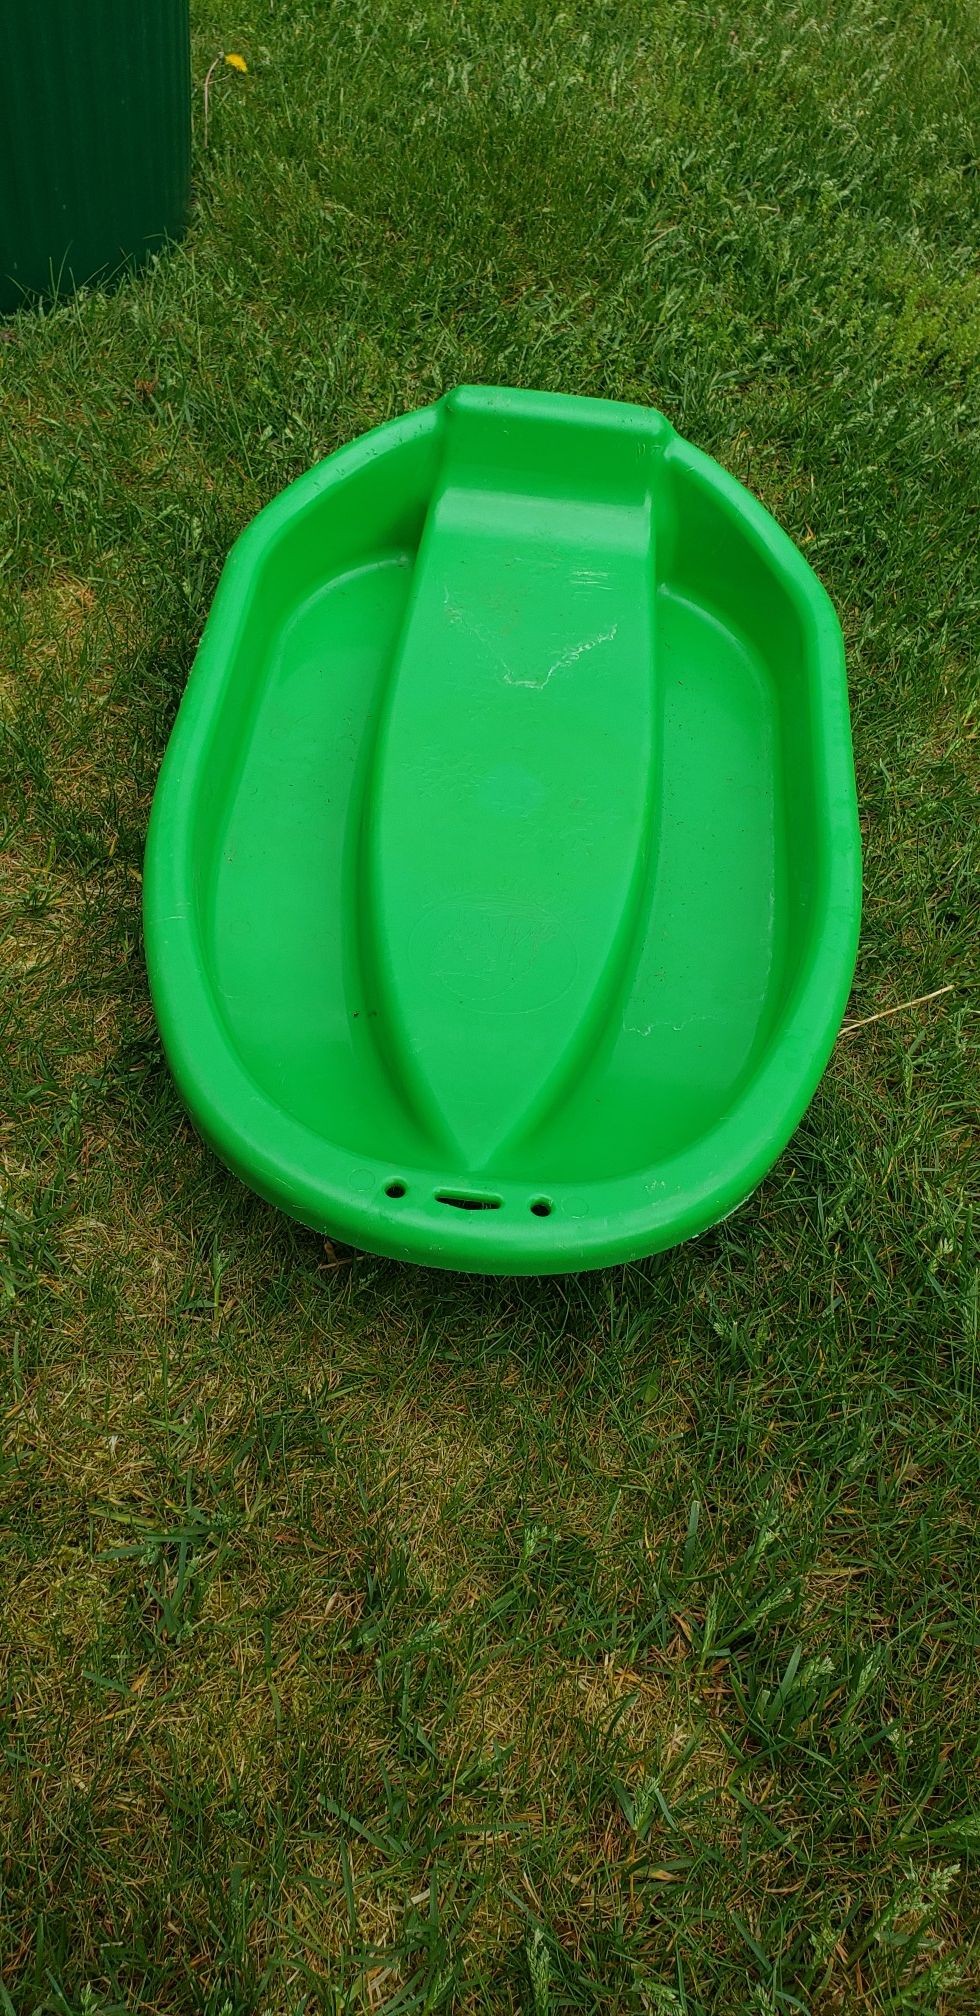 FREE: Small baby sled